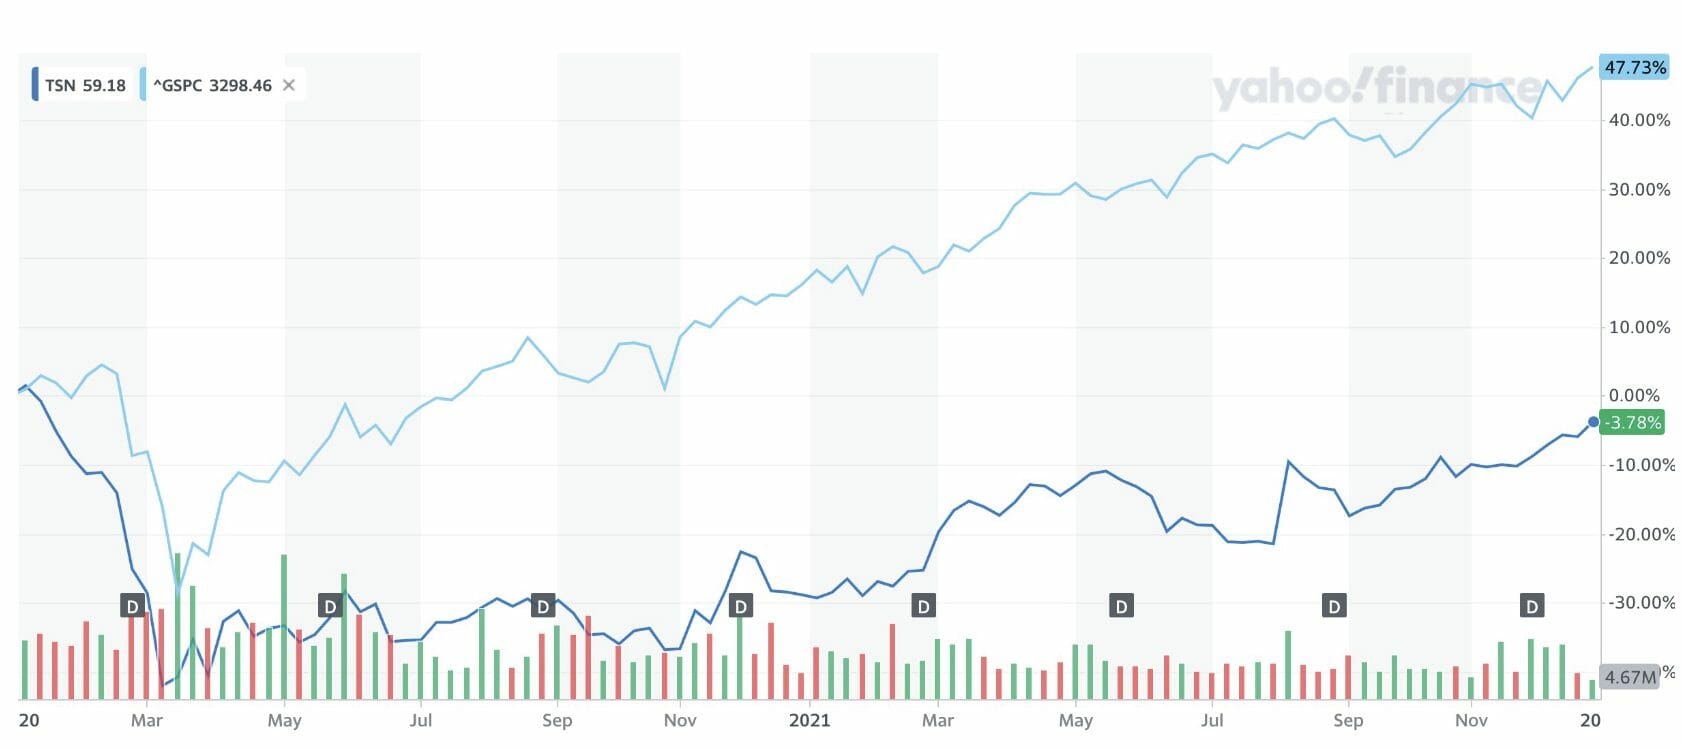 Yahoo Finance chart showing Tyson Foods lagging behind the stock market from the beginning of COVID to the end of 2021.